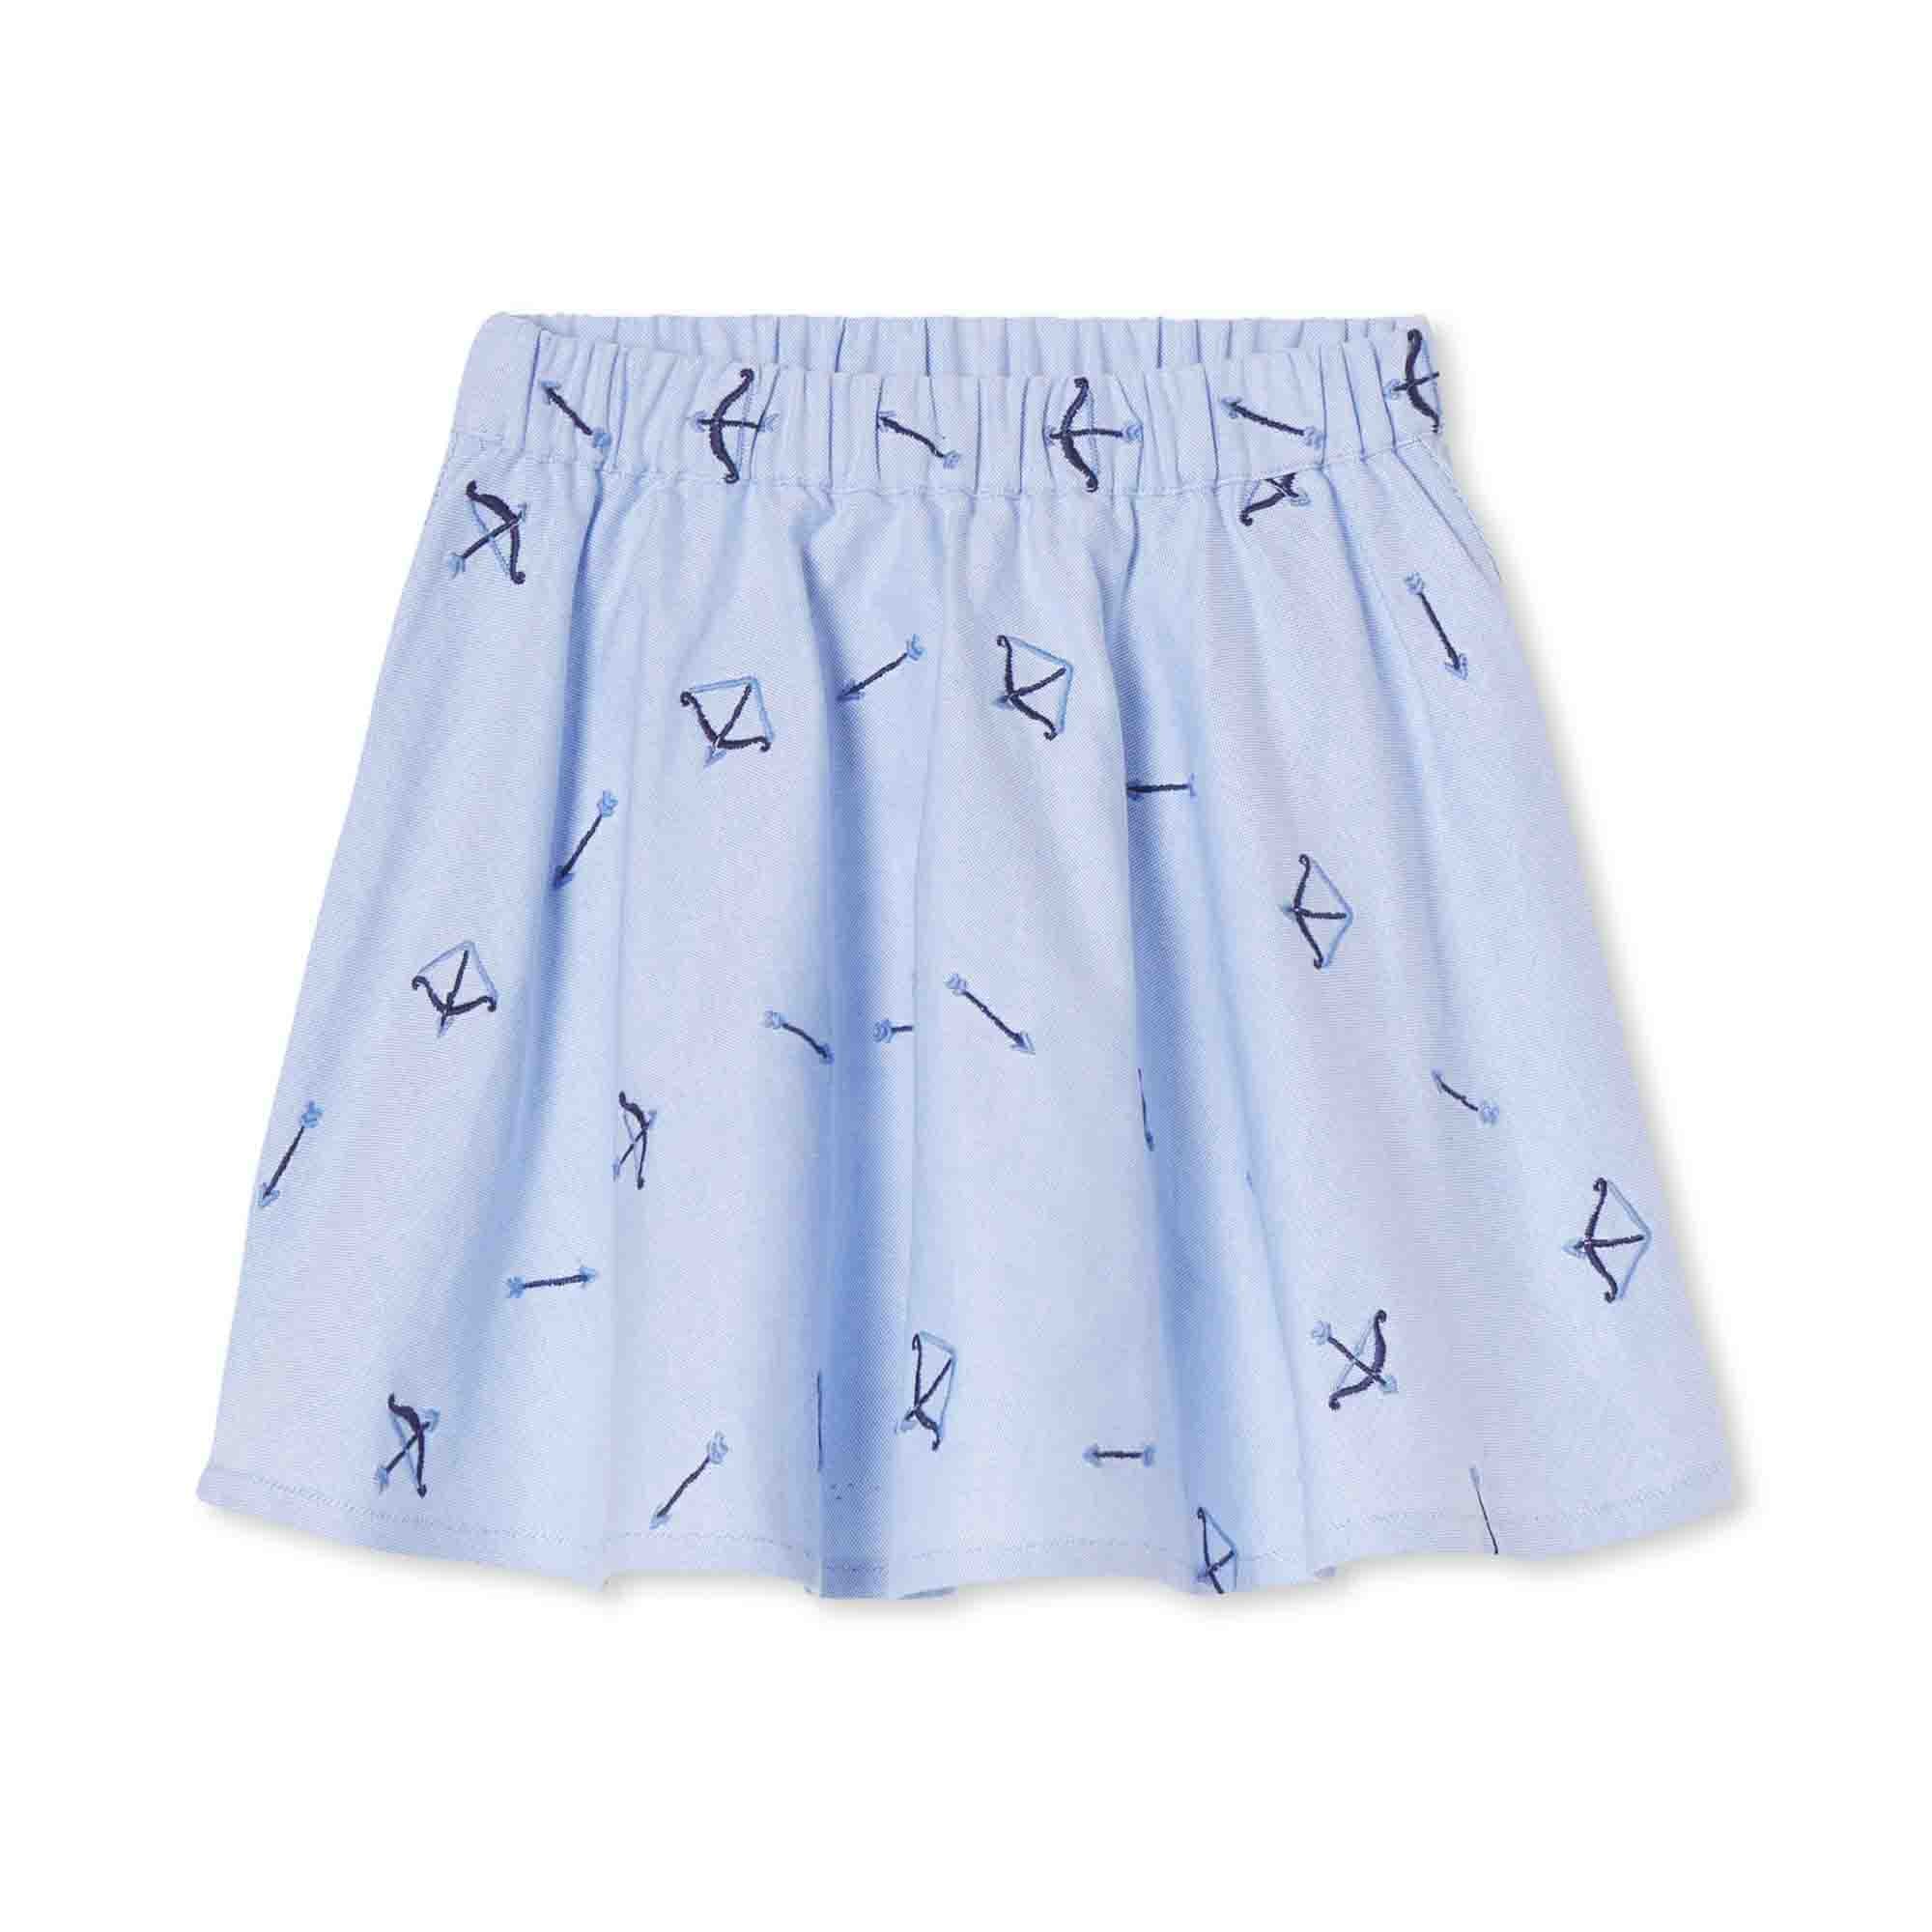 Bow and Arrow Embroidery / XS (2-3T)